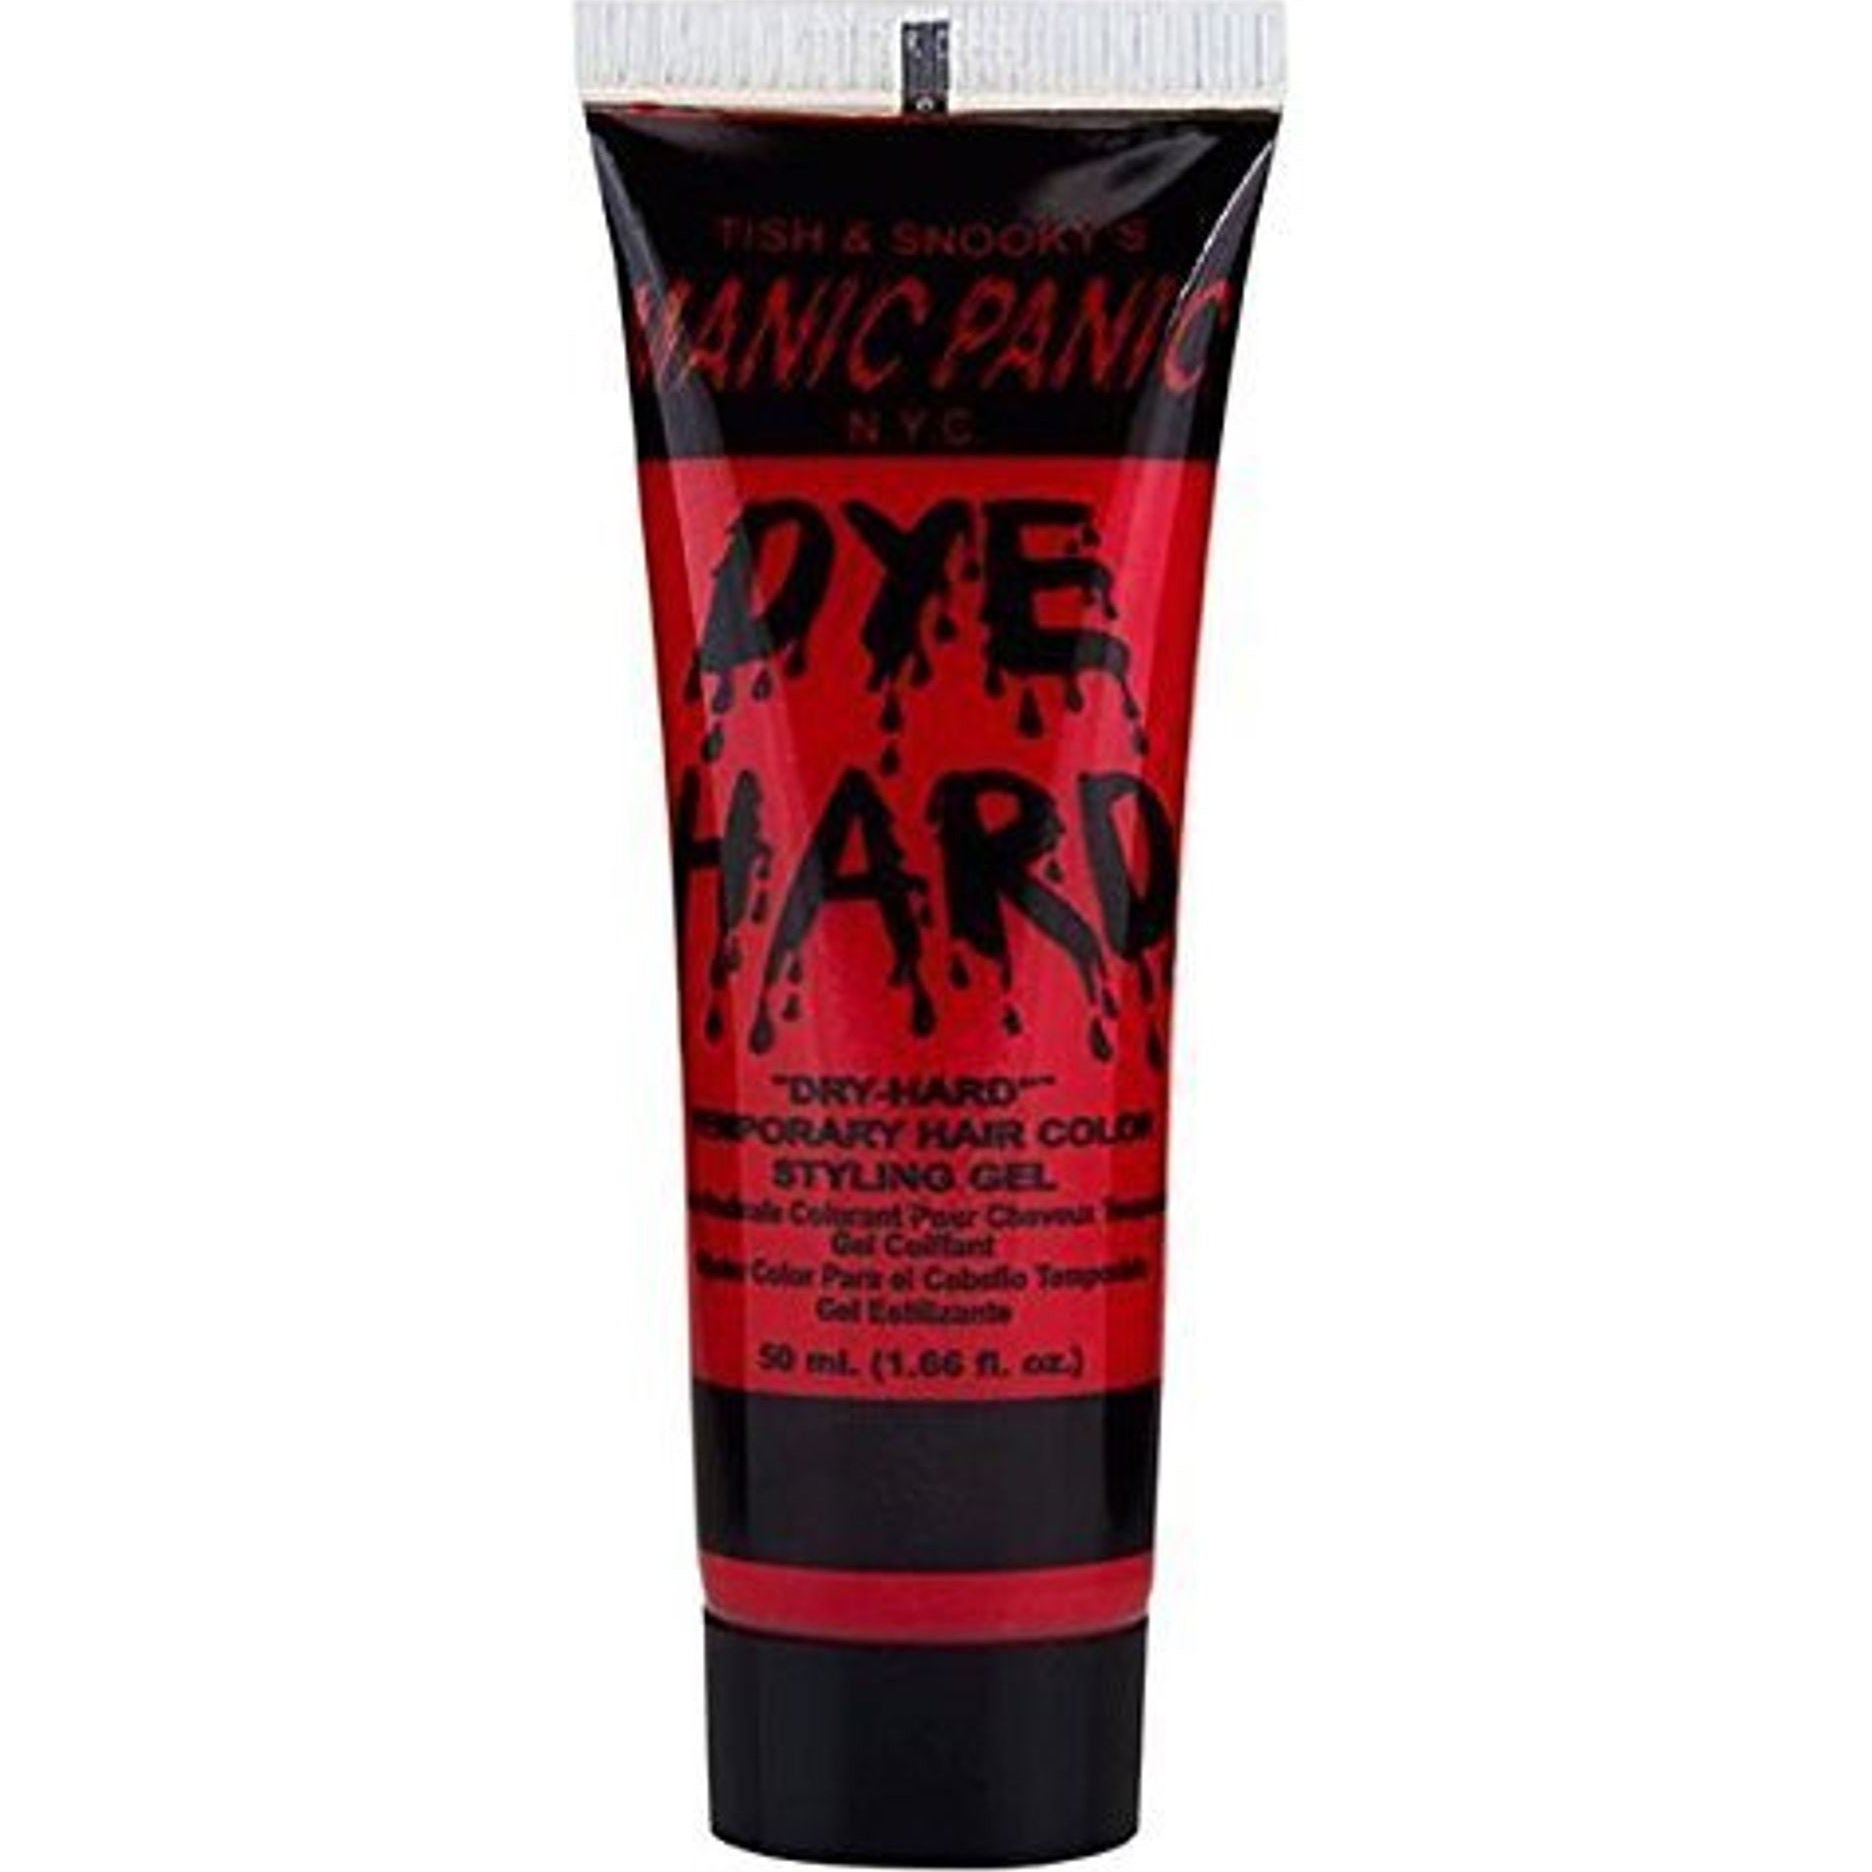 4th Ave Market: Manic Panic Dye-Hard Temporary Hair Color Styling Gel, Vampire Red